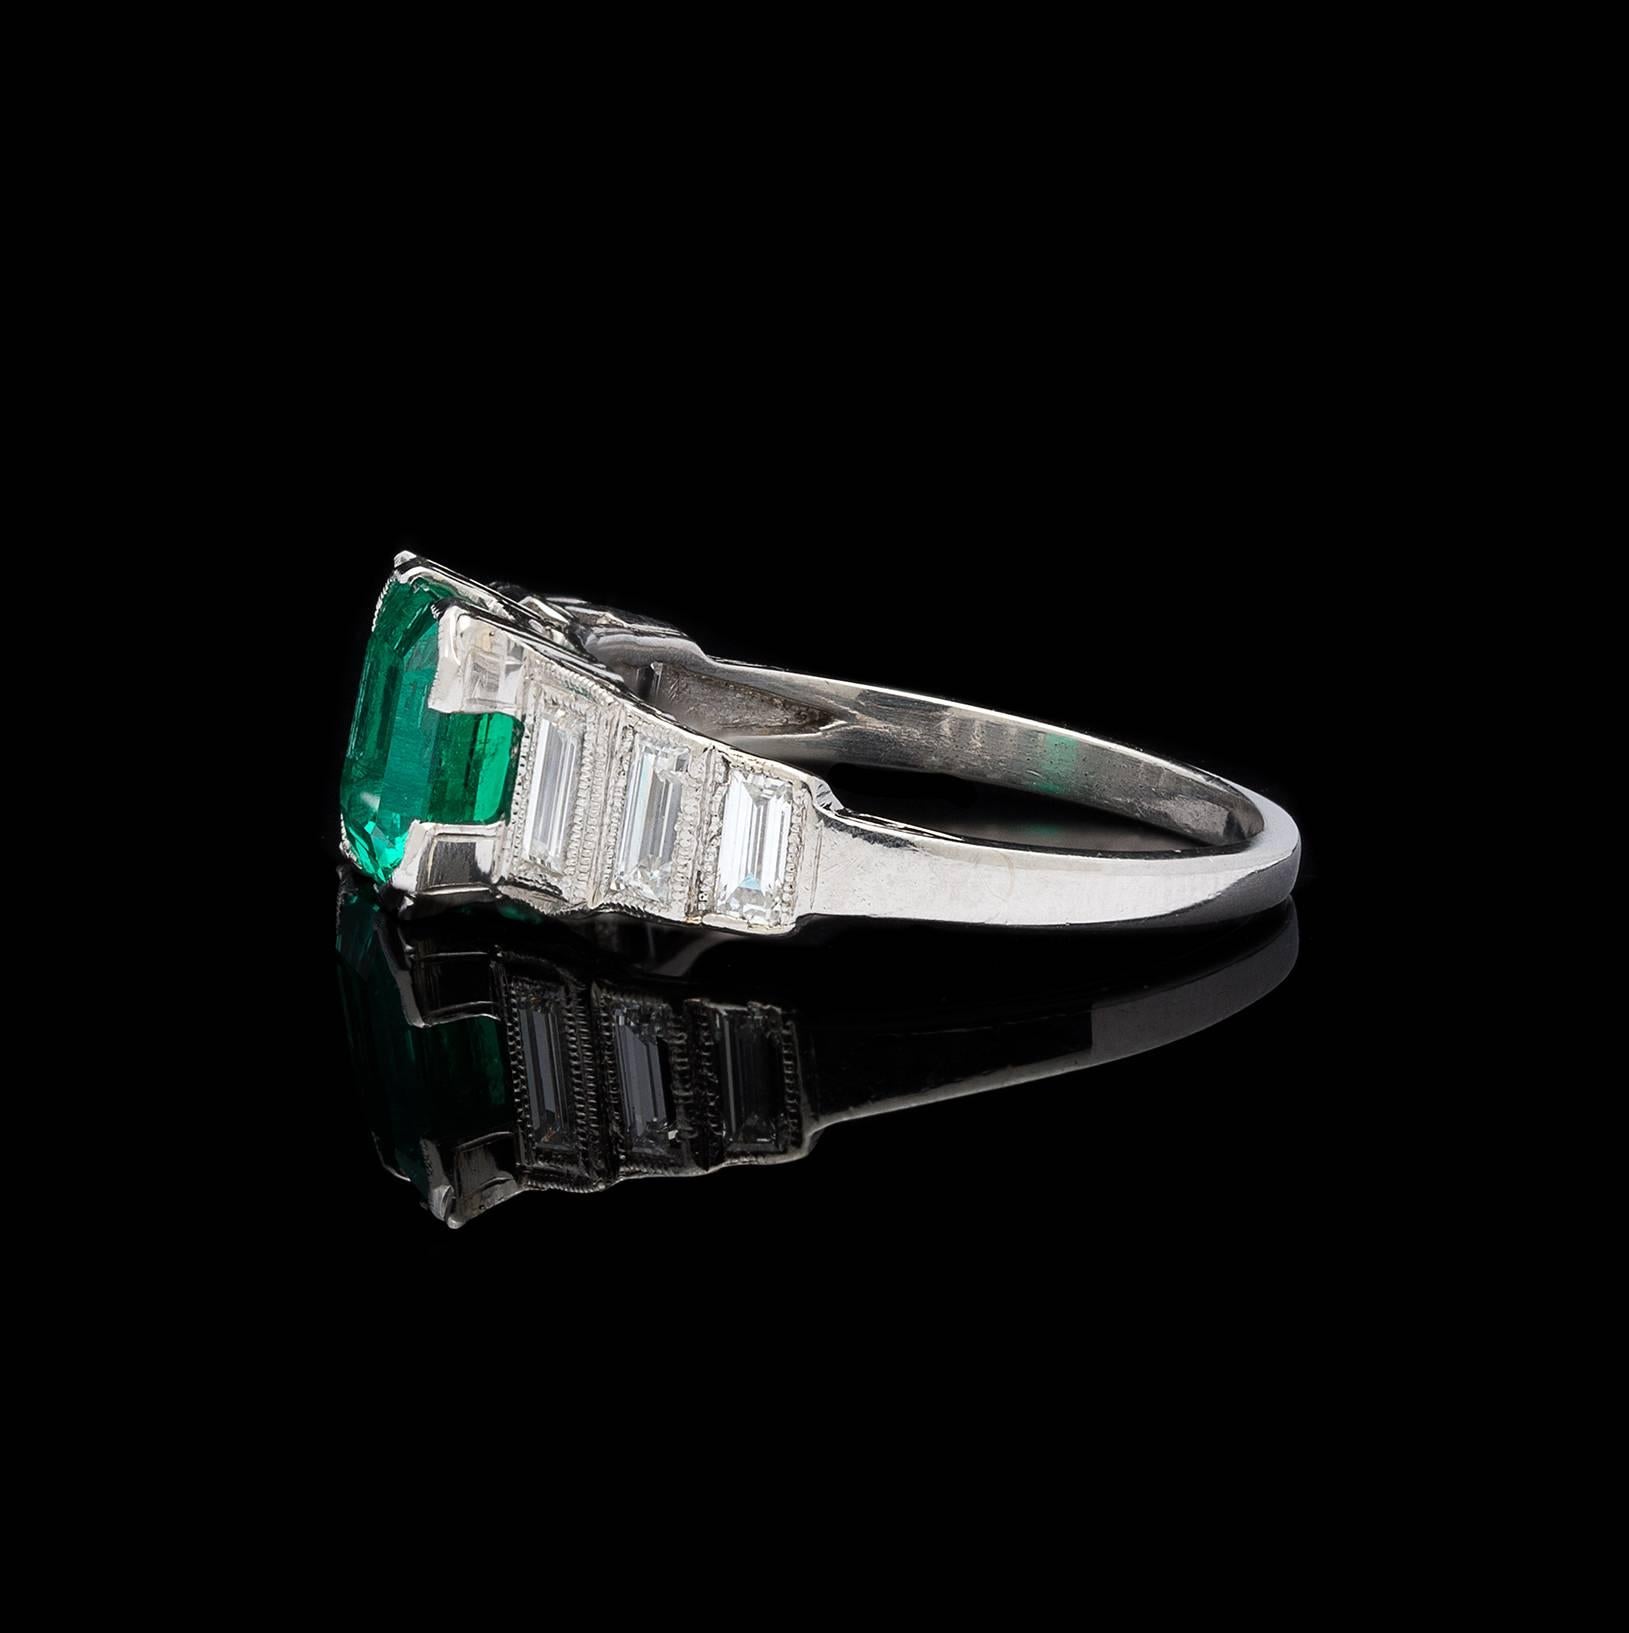 This elegantly designed ring showcases a bright and beautiful example of a high quality Colombian emerald. A gorgeous blue-green color and clean to the eye, the Octagonal Step-Cut Emerald weighs 1.37 carats, and is accented down the ring with 6